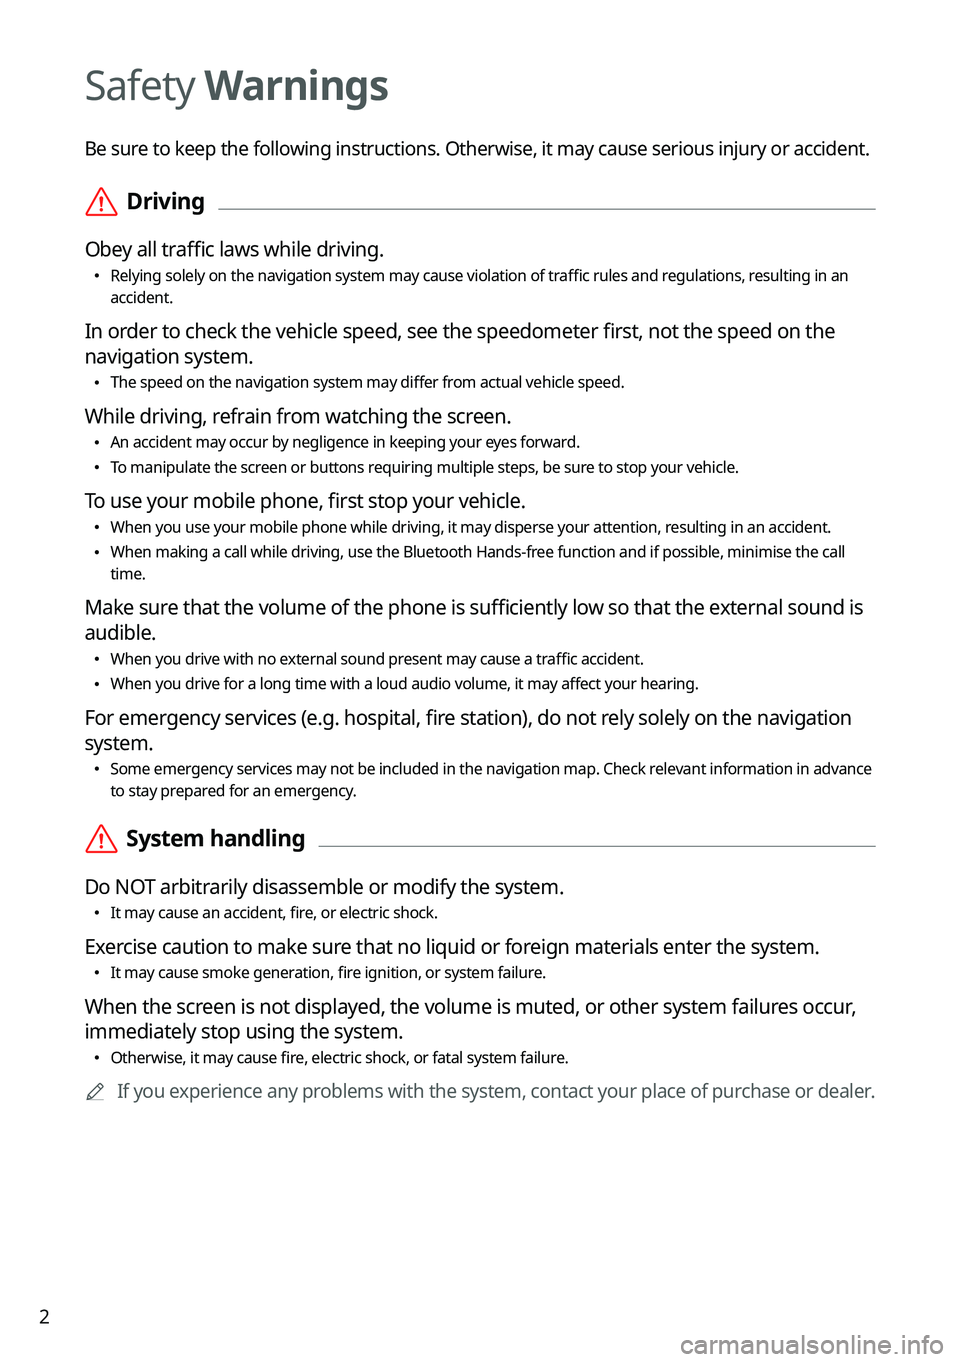 KIA SORENTO HYBRID 2021  Navigation System Quick Reference Guide 2
Safety Warnings
Be sure to keep the following instructions. Otherwise, it may cause serious injury or accident.
 \335Driving
Obey all traffic laws while driving.
 \225Relying solely on the navigatio